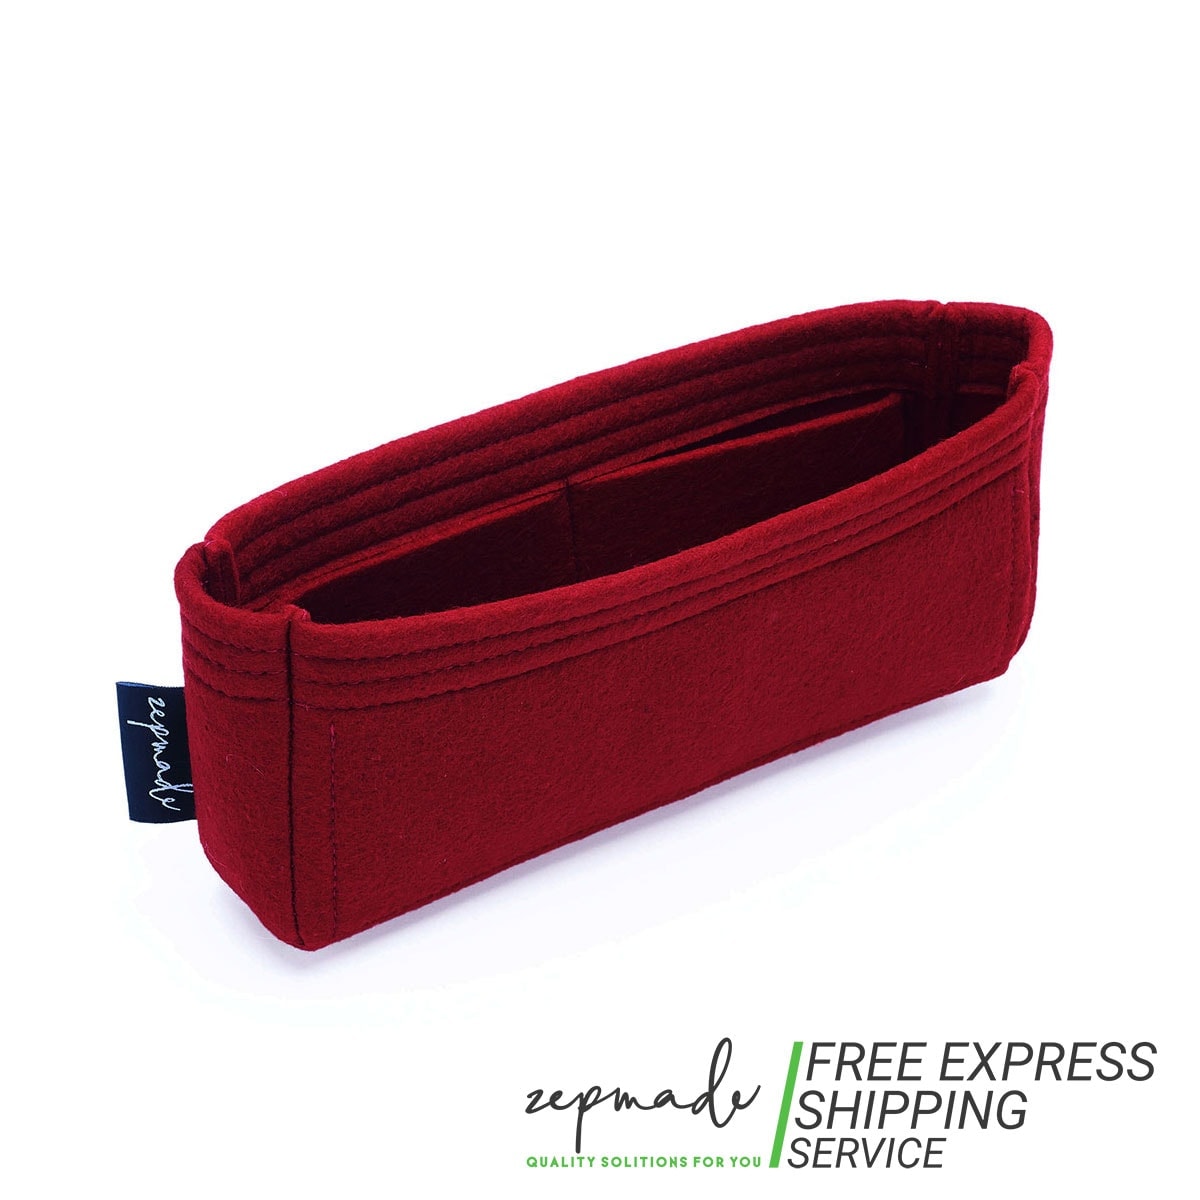 [NOE Organizer] Felt Purse Insert with Middle Zip Pouch, Customized To